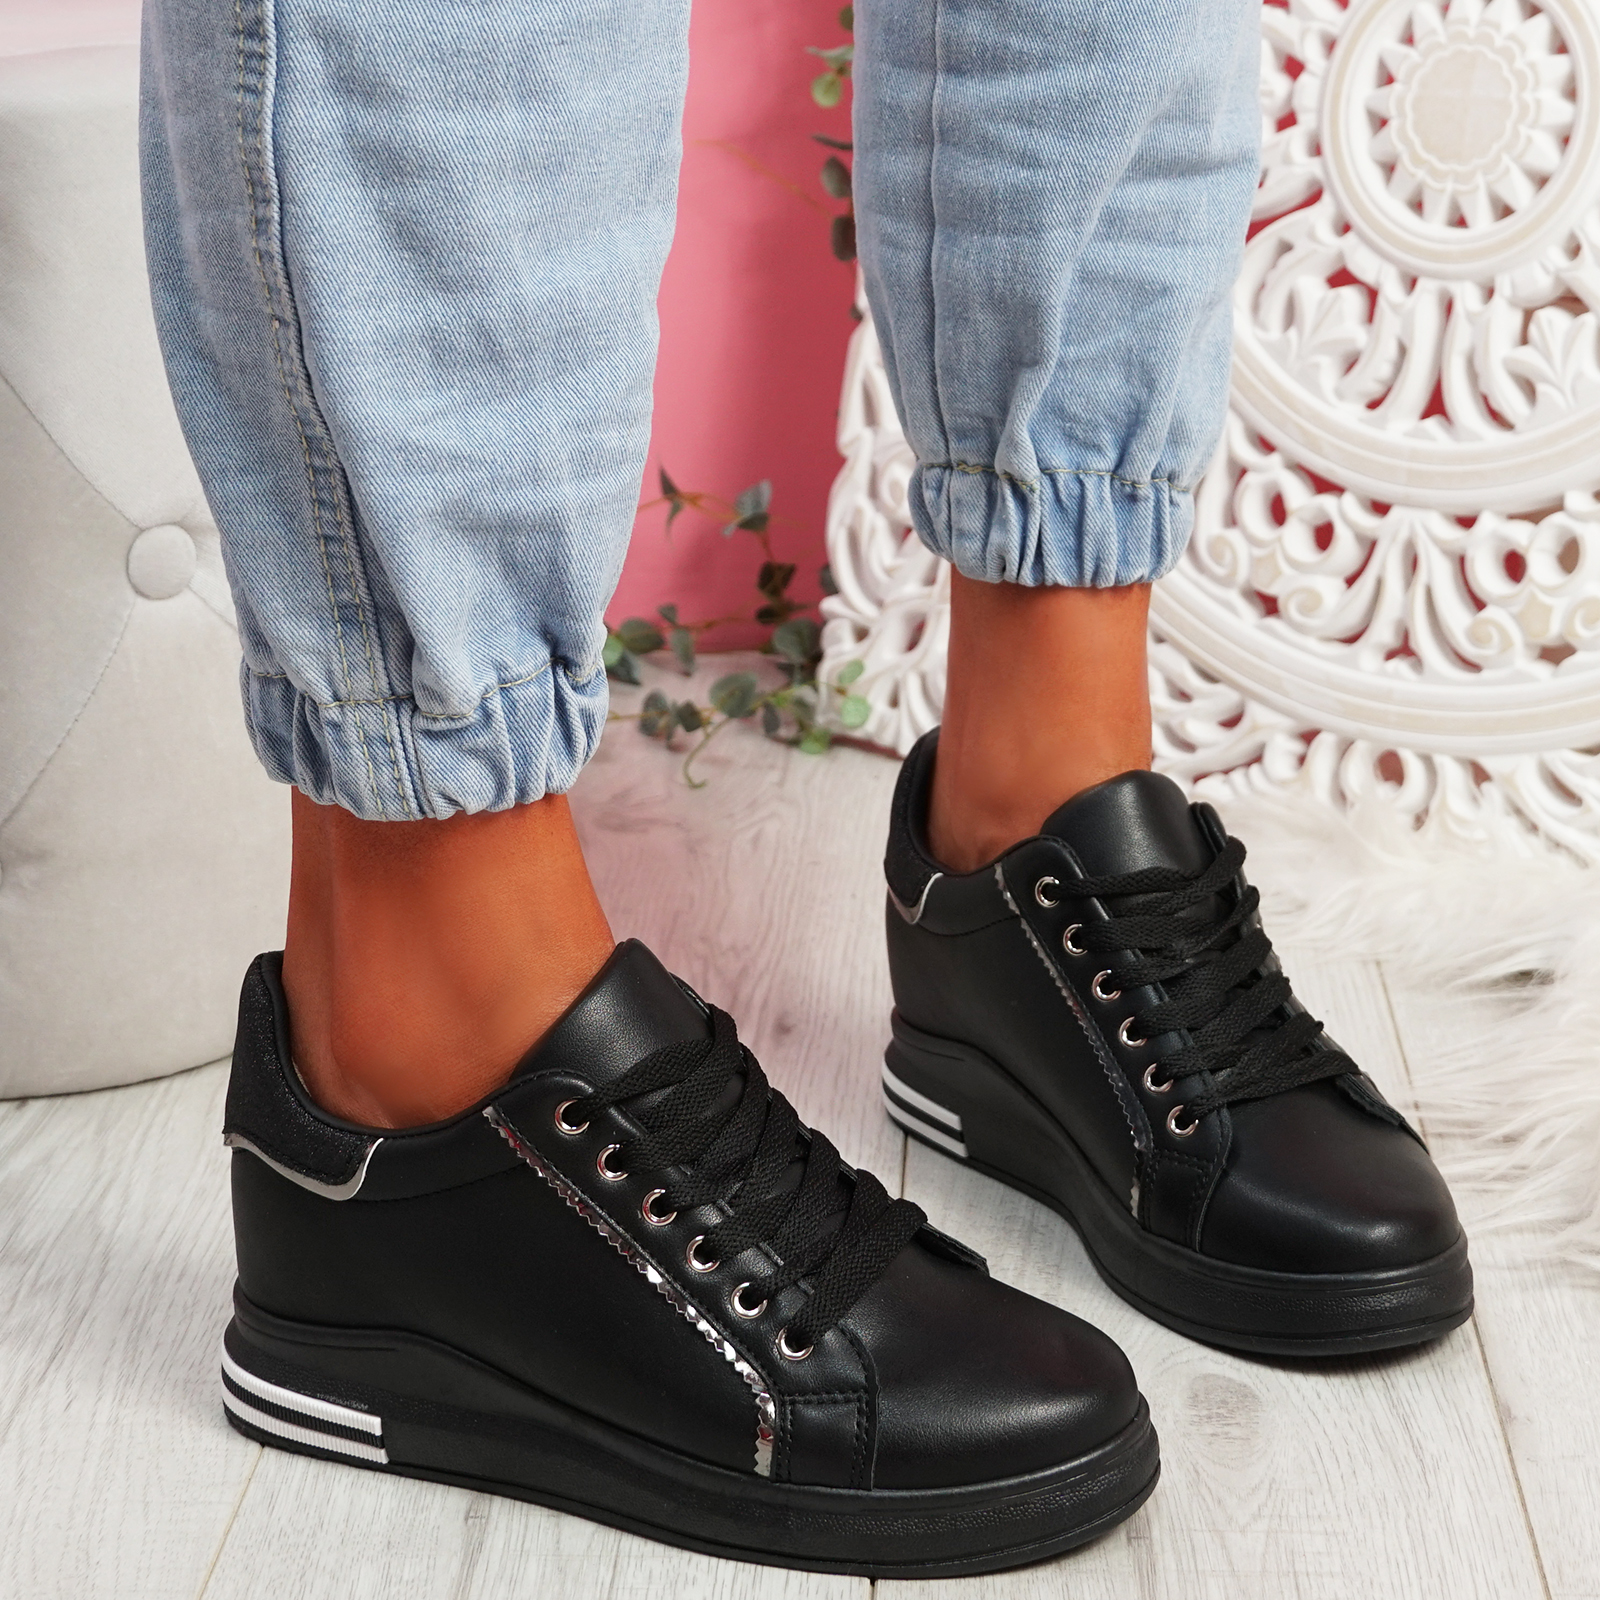 YZ Fashion Wedge Sneaker for Women High Heel Lace Up India | Ubuy